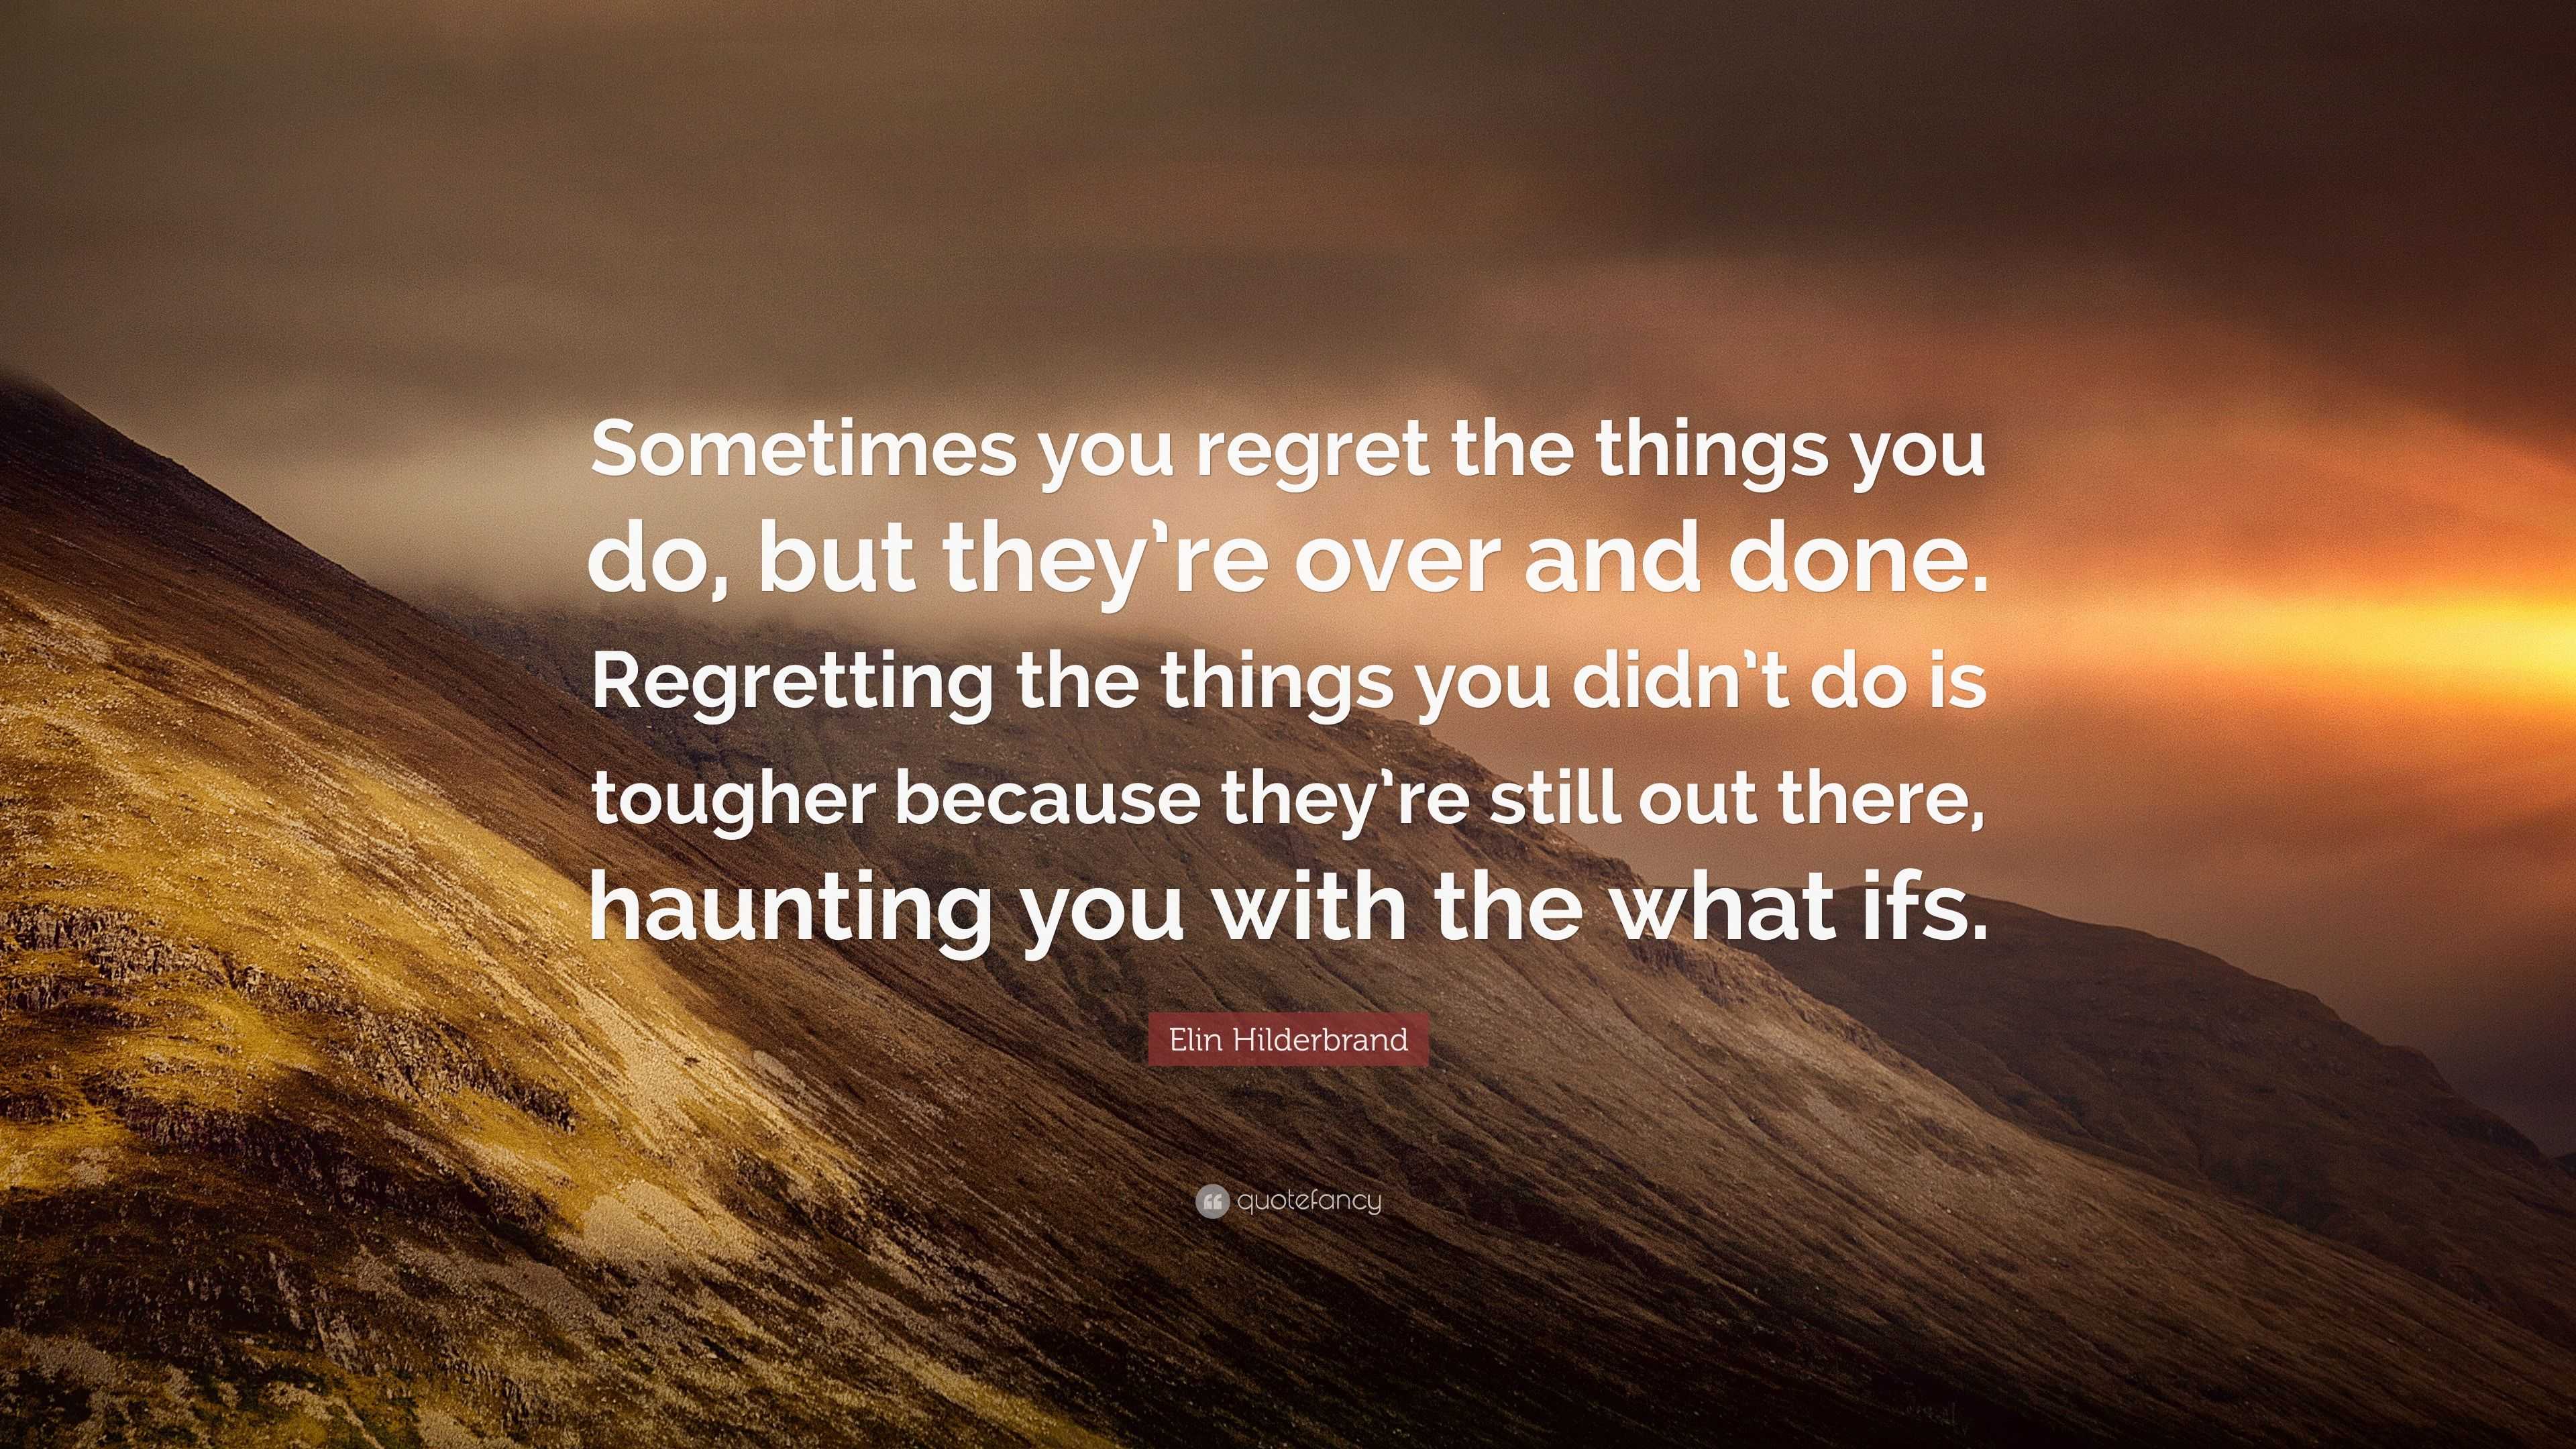 Elin Hilderbrand Quote: “Sometimes you regret the things you do, but ...